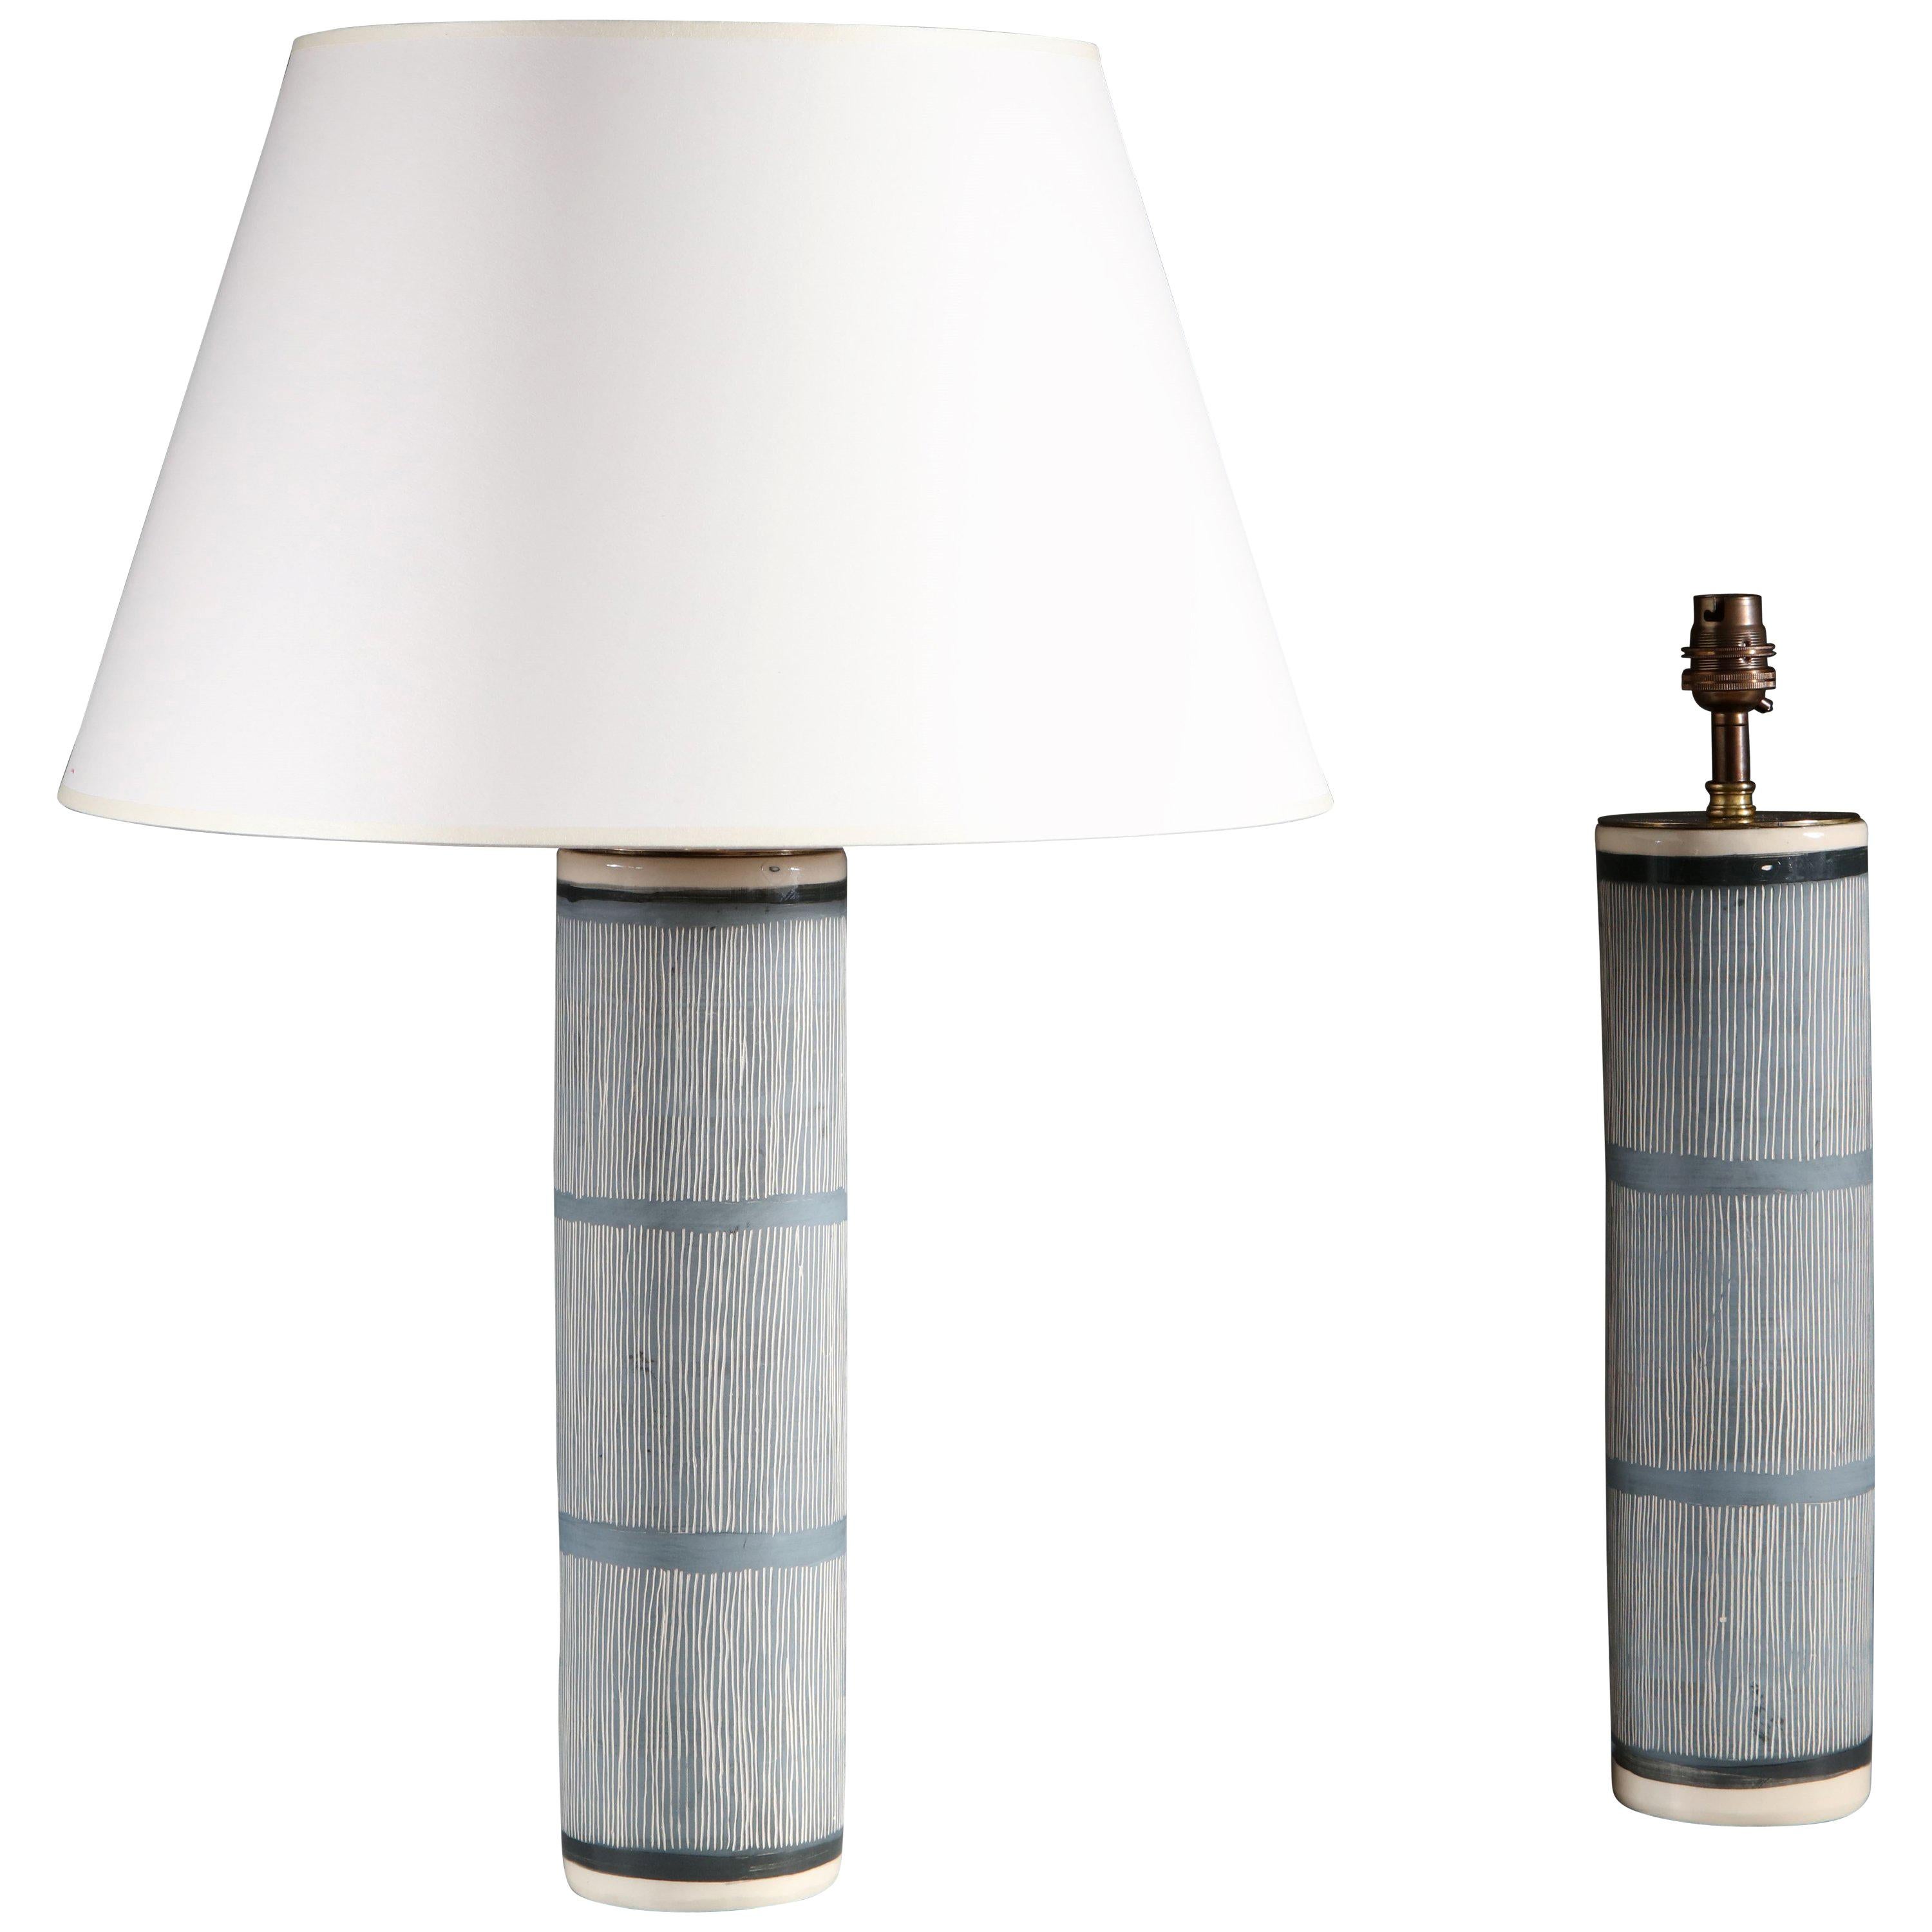 Pair of Dark Blue and White Striped Contemporary Ceramic Studio Pottery Lamps